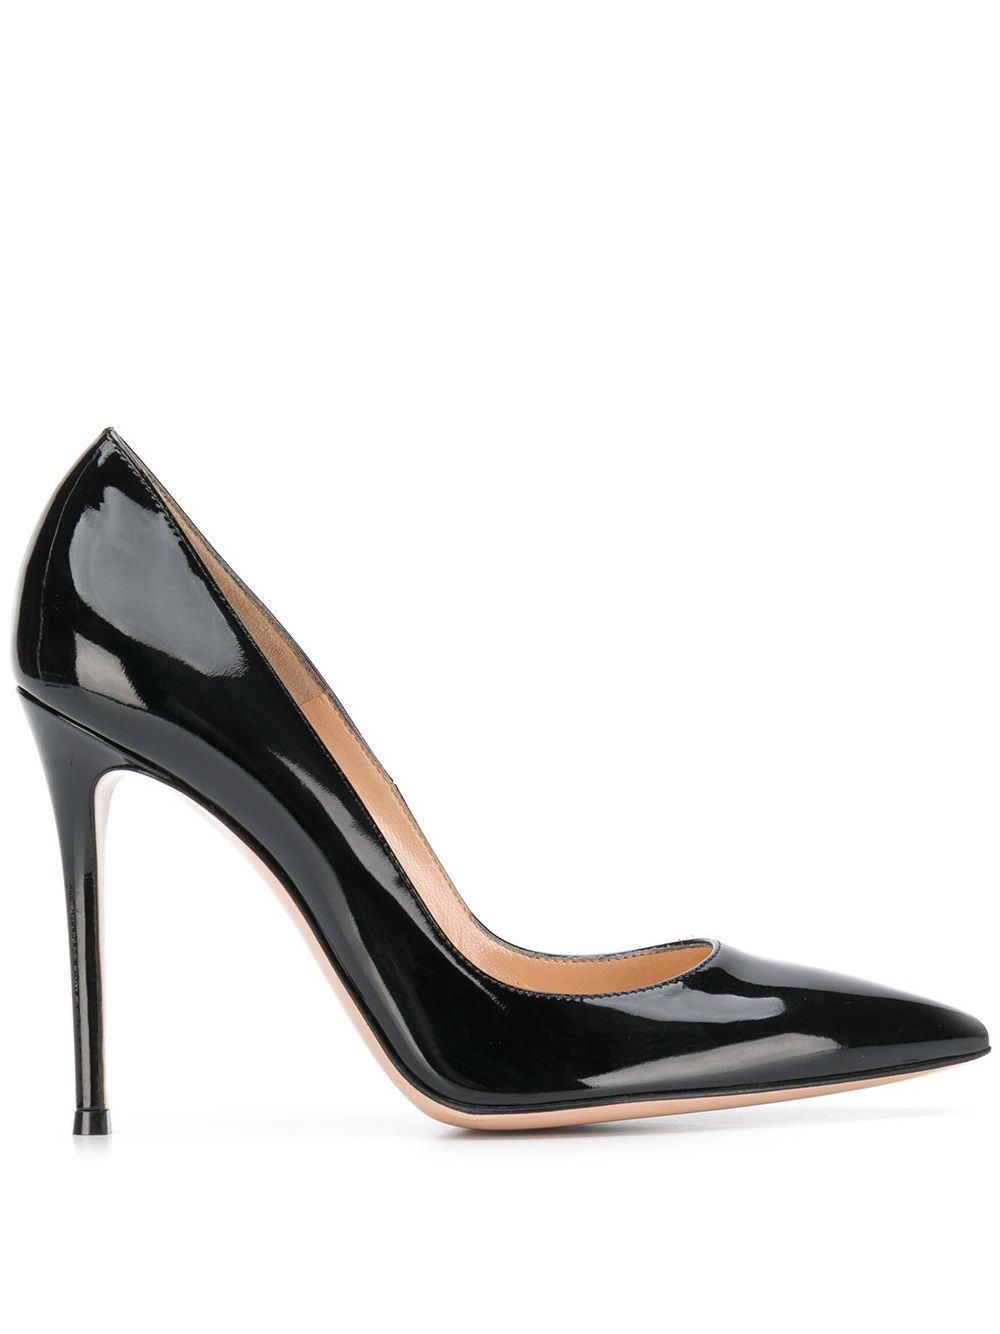 Image 1 of Gianvito Rossi pointed court shoes